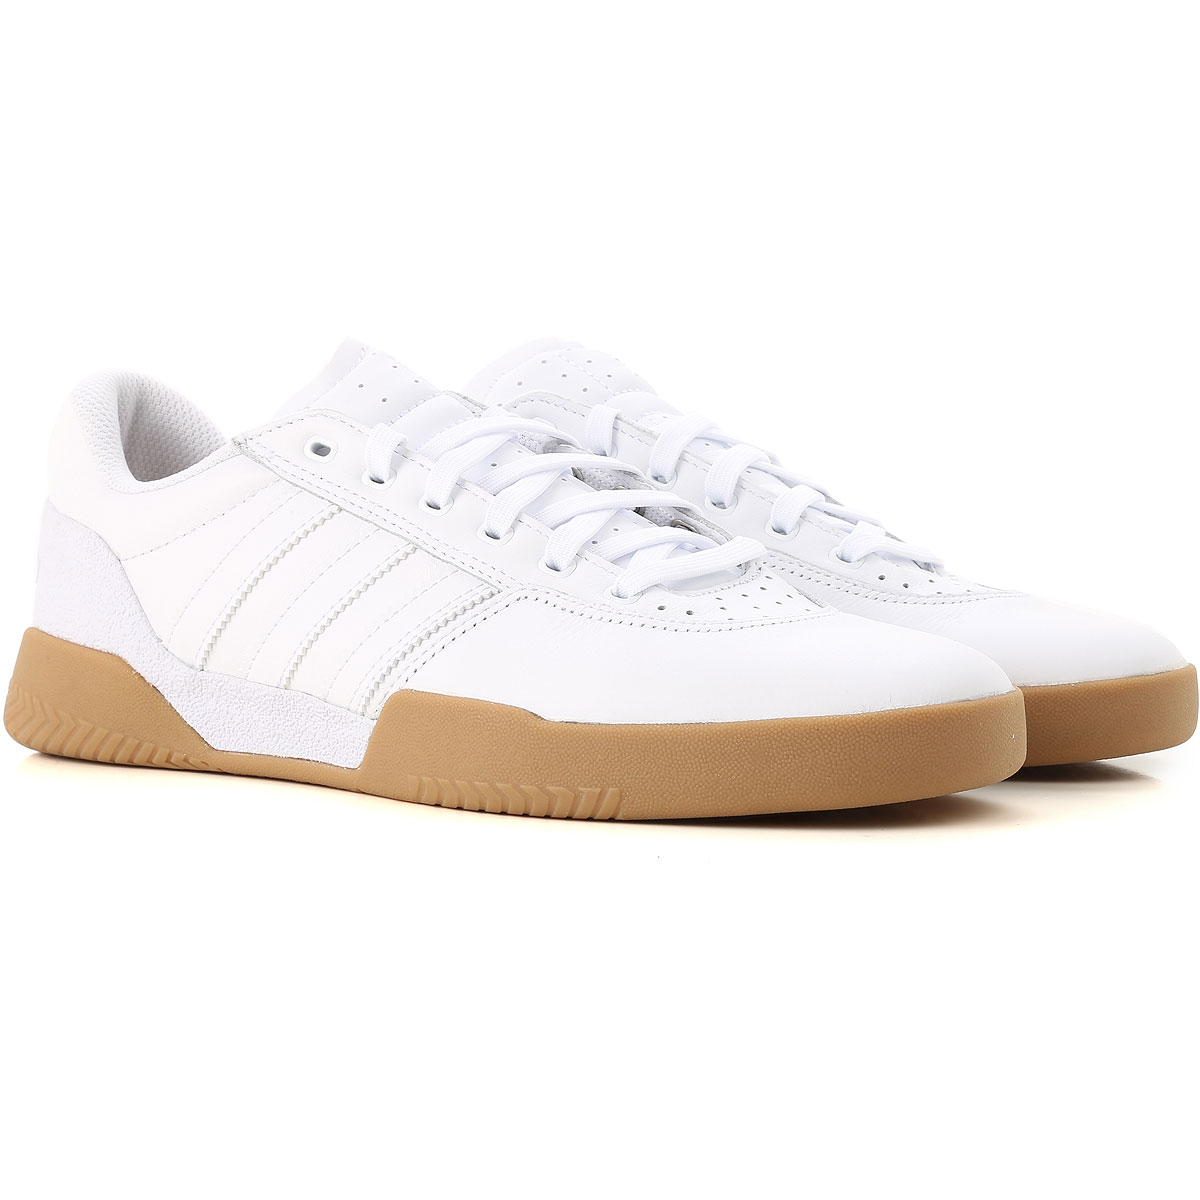 Mens Shoes Adidas, Style code: b22729-citycup-